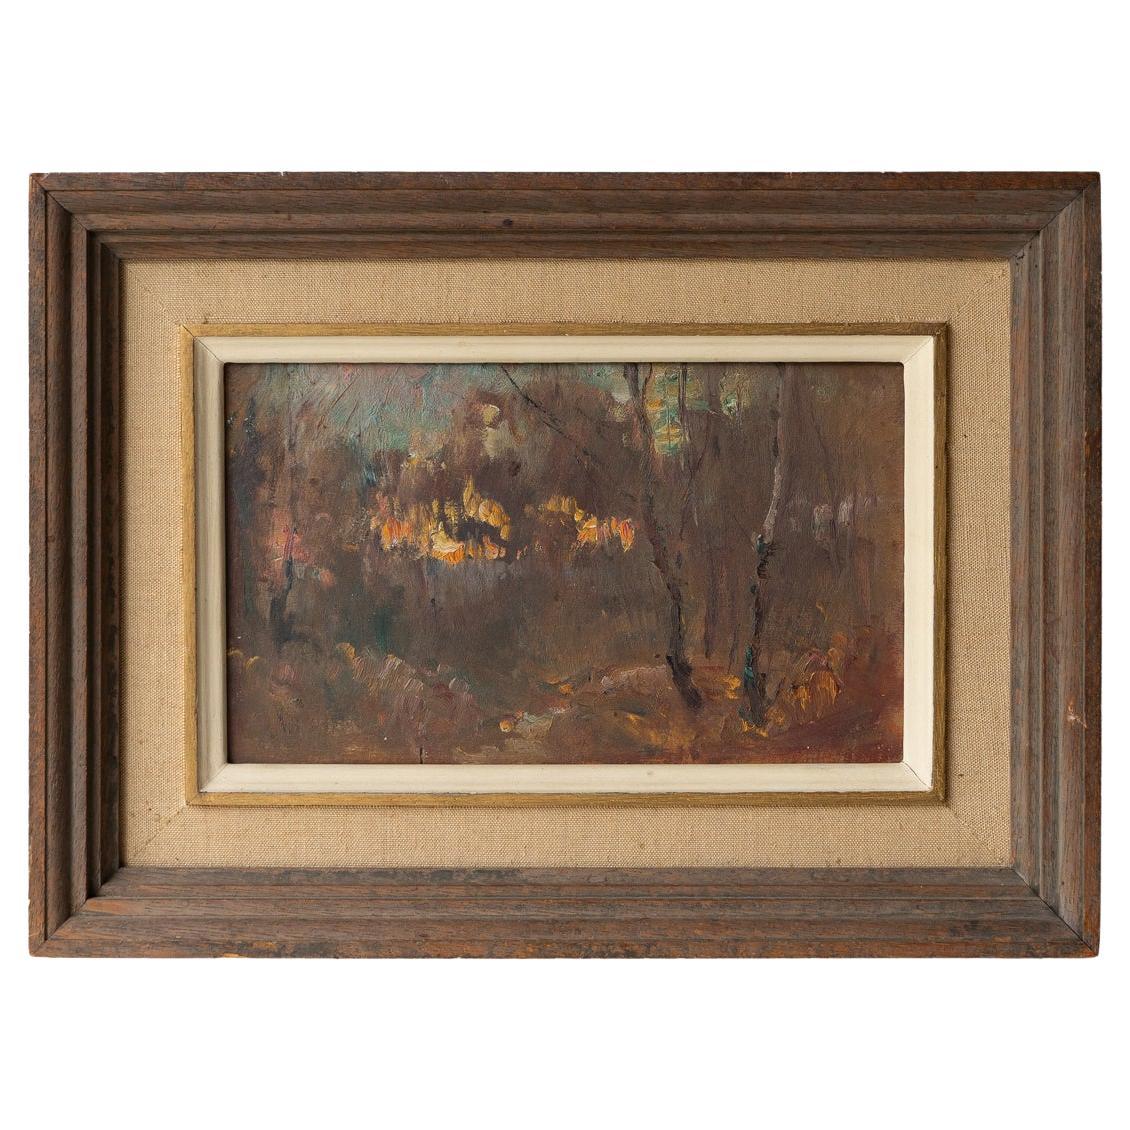 English Impressionist Landscape By James Herbert Snell, Antique Oil Painting For Sale